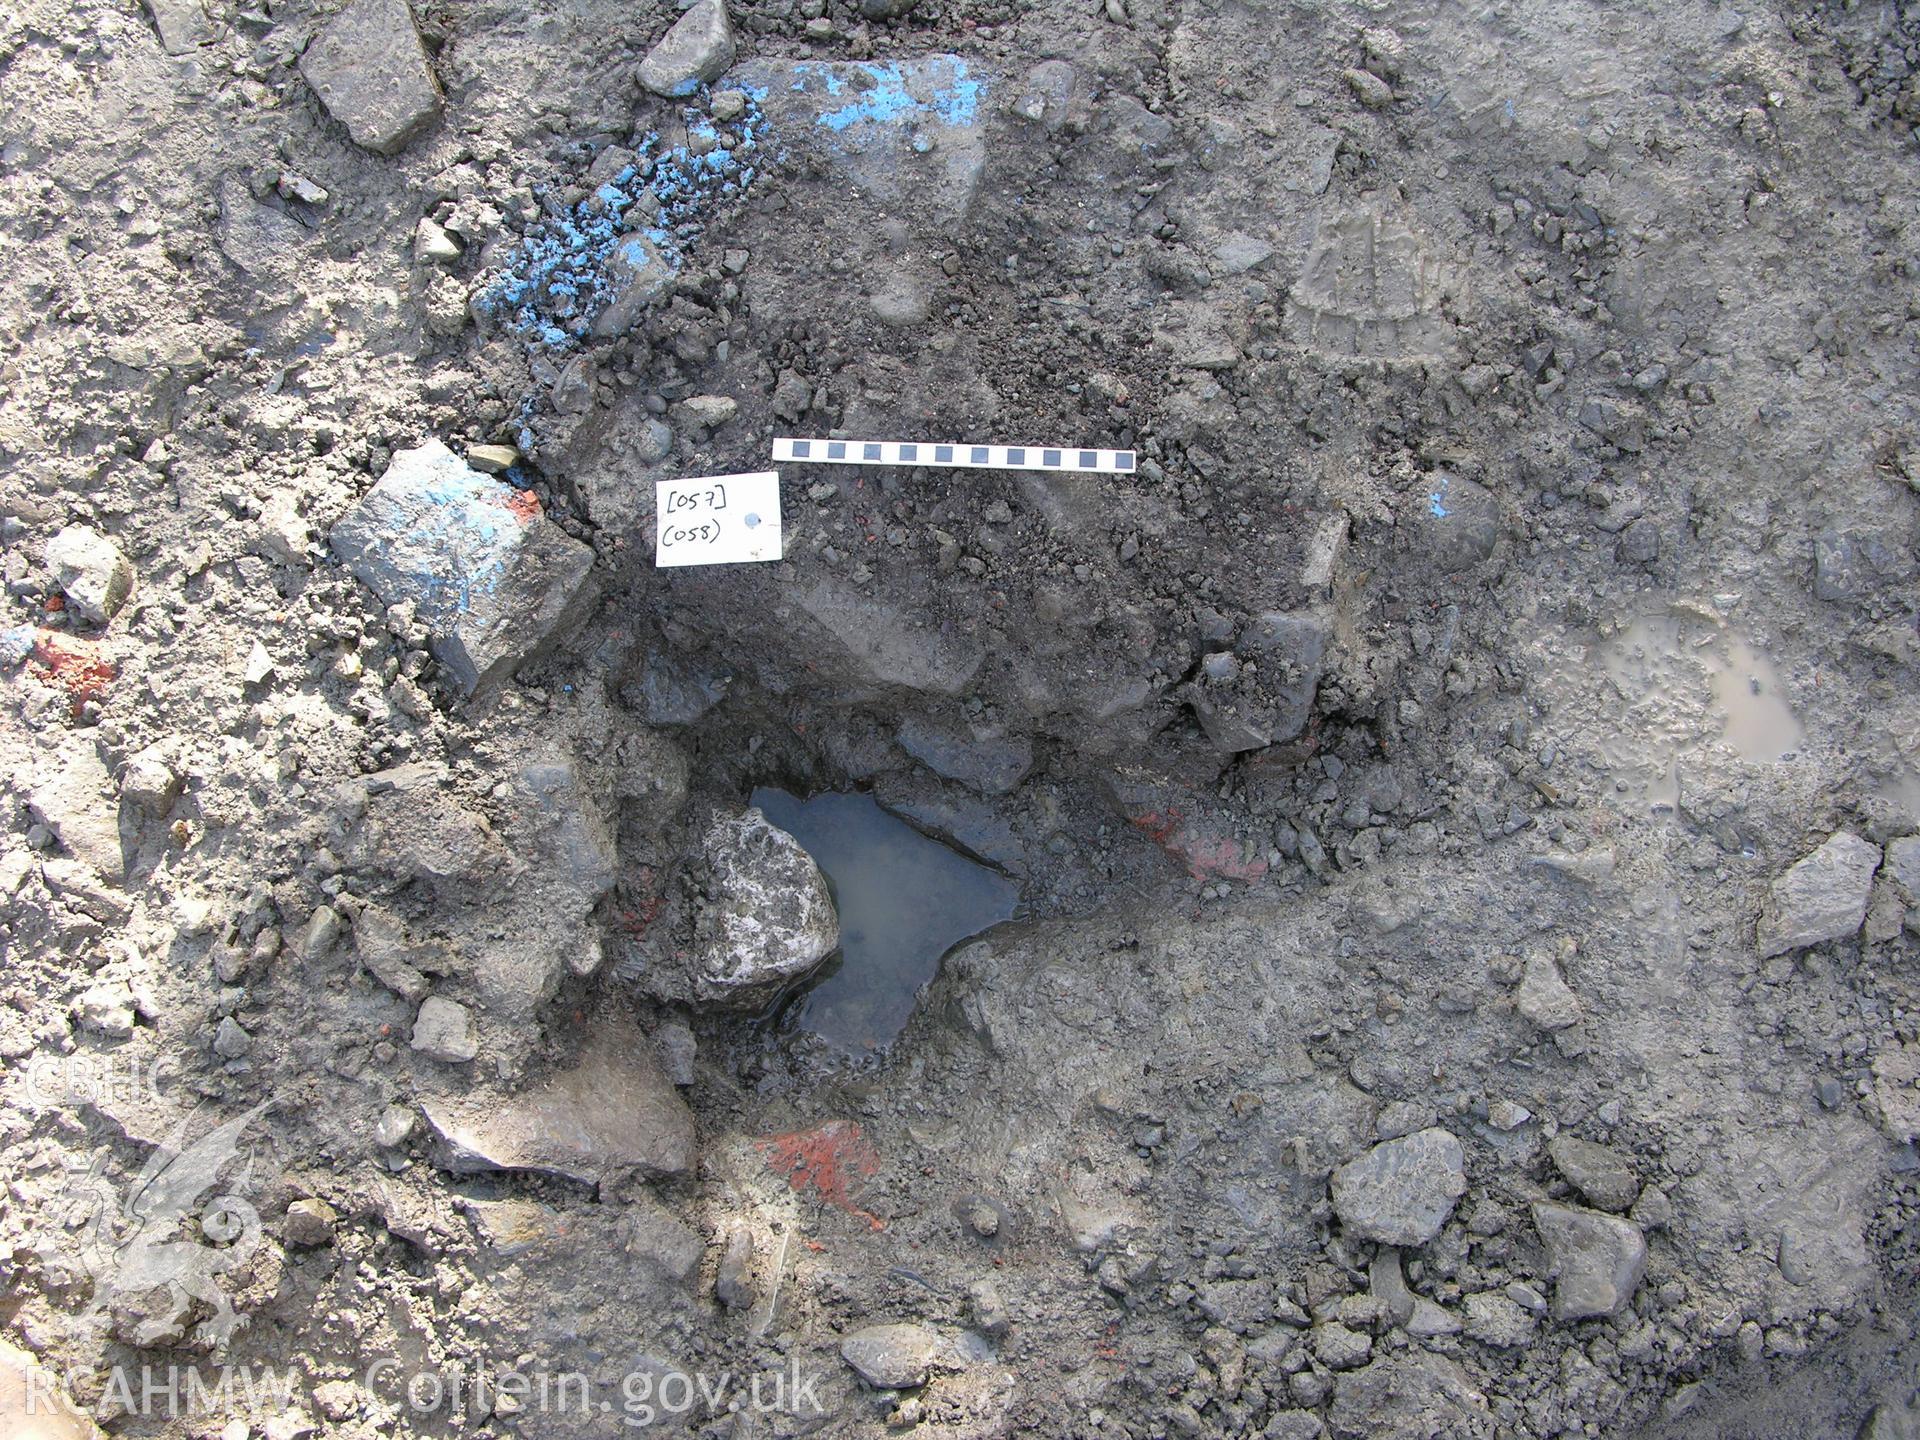 Colour digital photograph showing example of a post medieval posthole from southern alignment - part of the Archaeological Excavation report for Horse Yard Farm, Evenjobb (CAP Report 607) by Chris E Smith, from a Cambrian Archaeological Projects assessment survey.